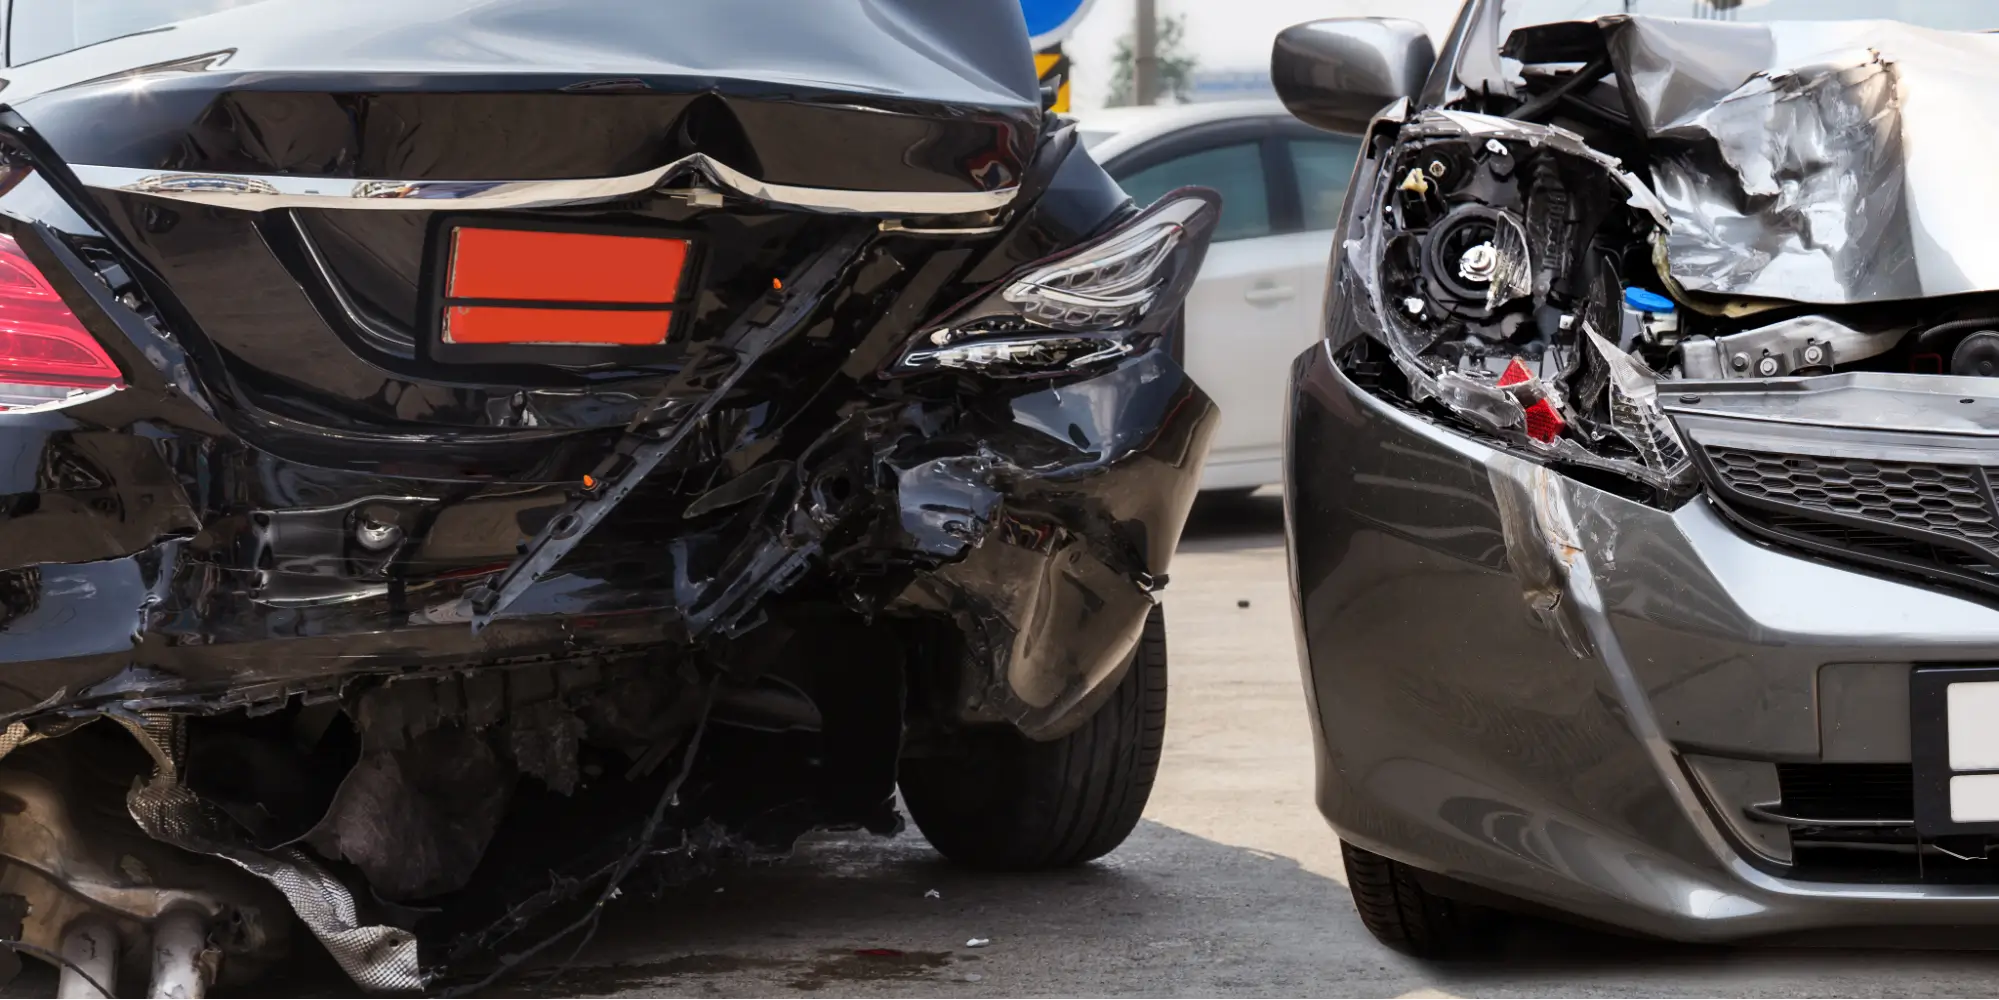 Injured in a car accident by a self-driving car? Our Henderson car accident attorneys are here to help.